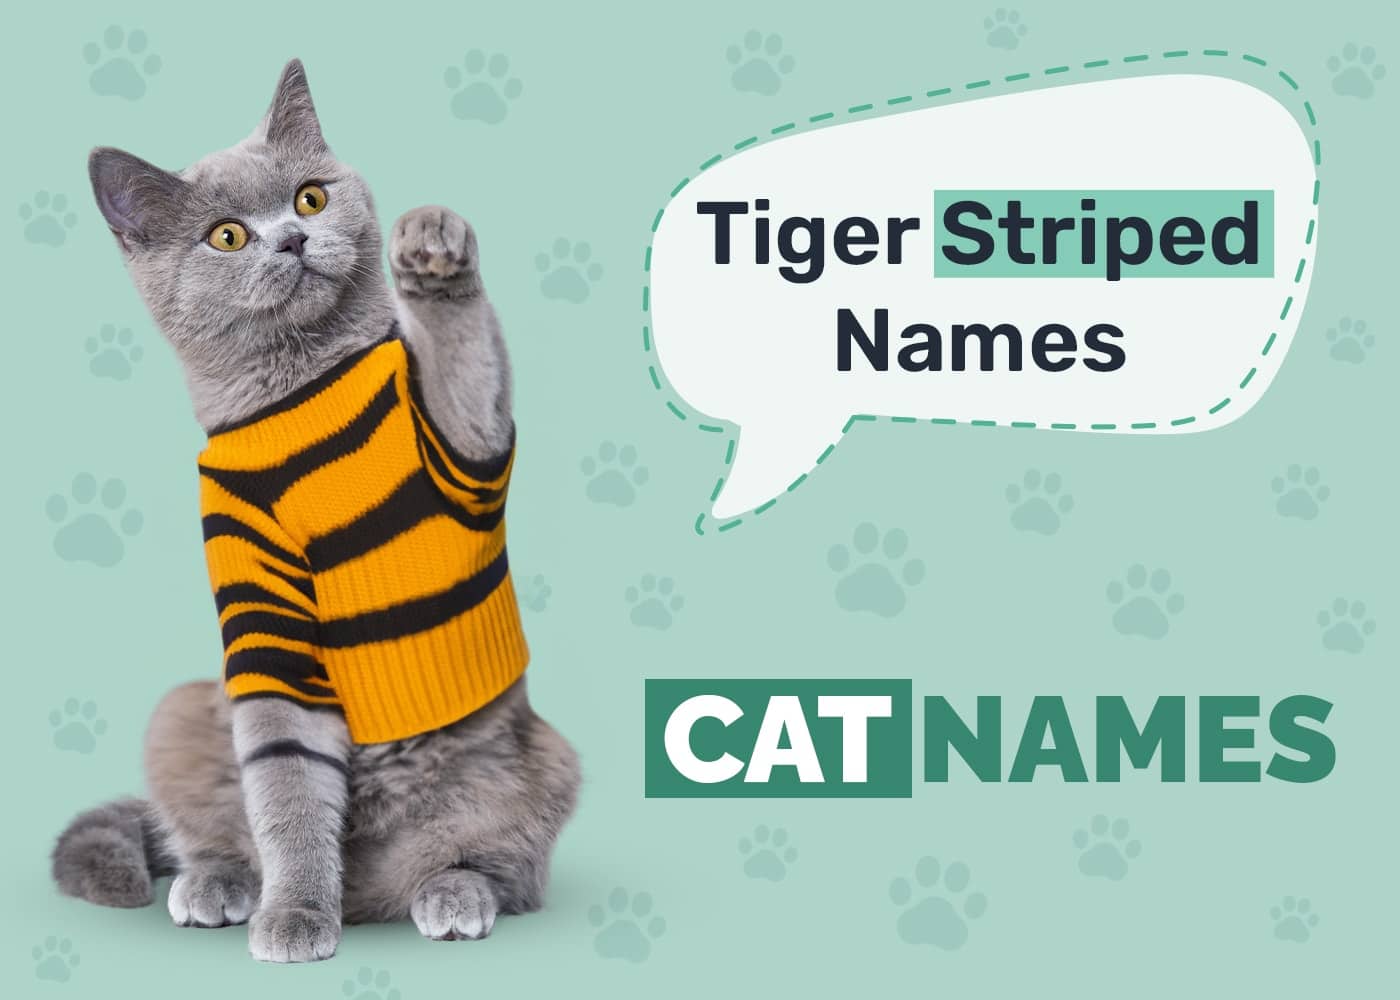 100+ Tiger Striped Cat Names: Ideas for Unique & Exotic Cats - Catster